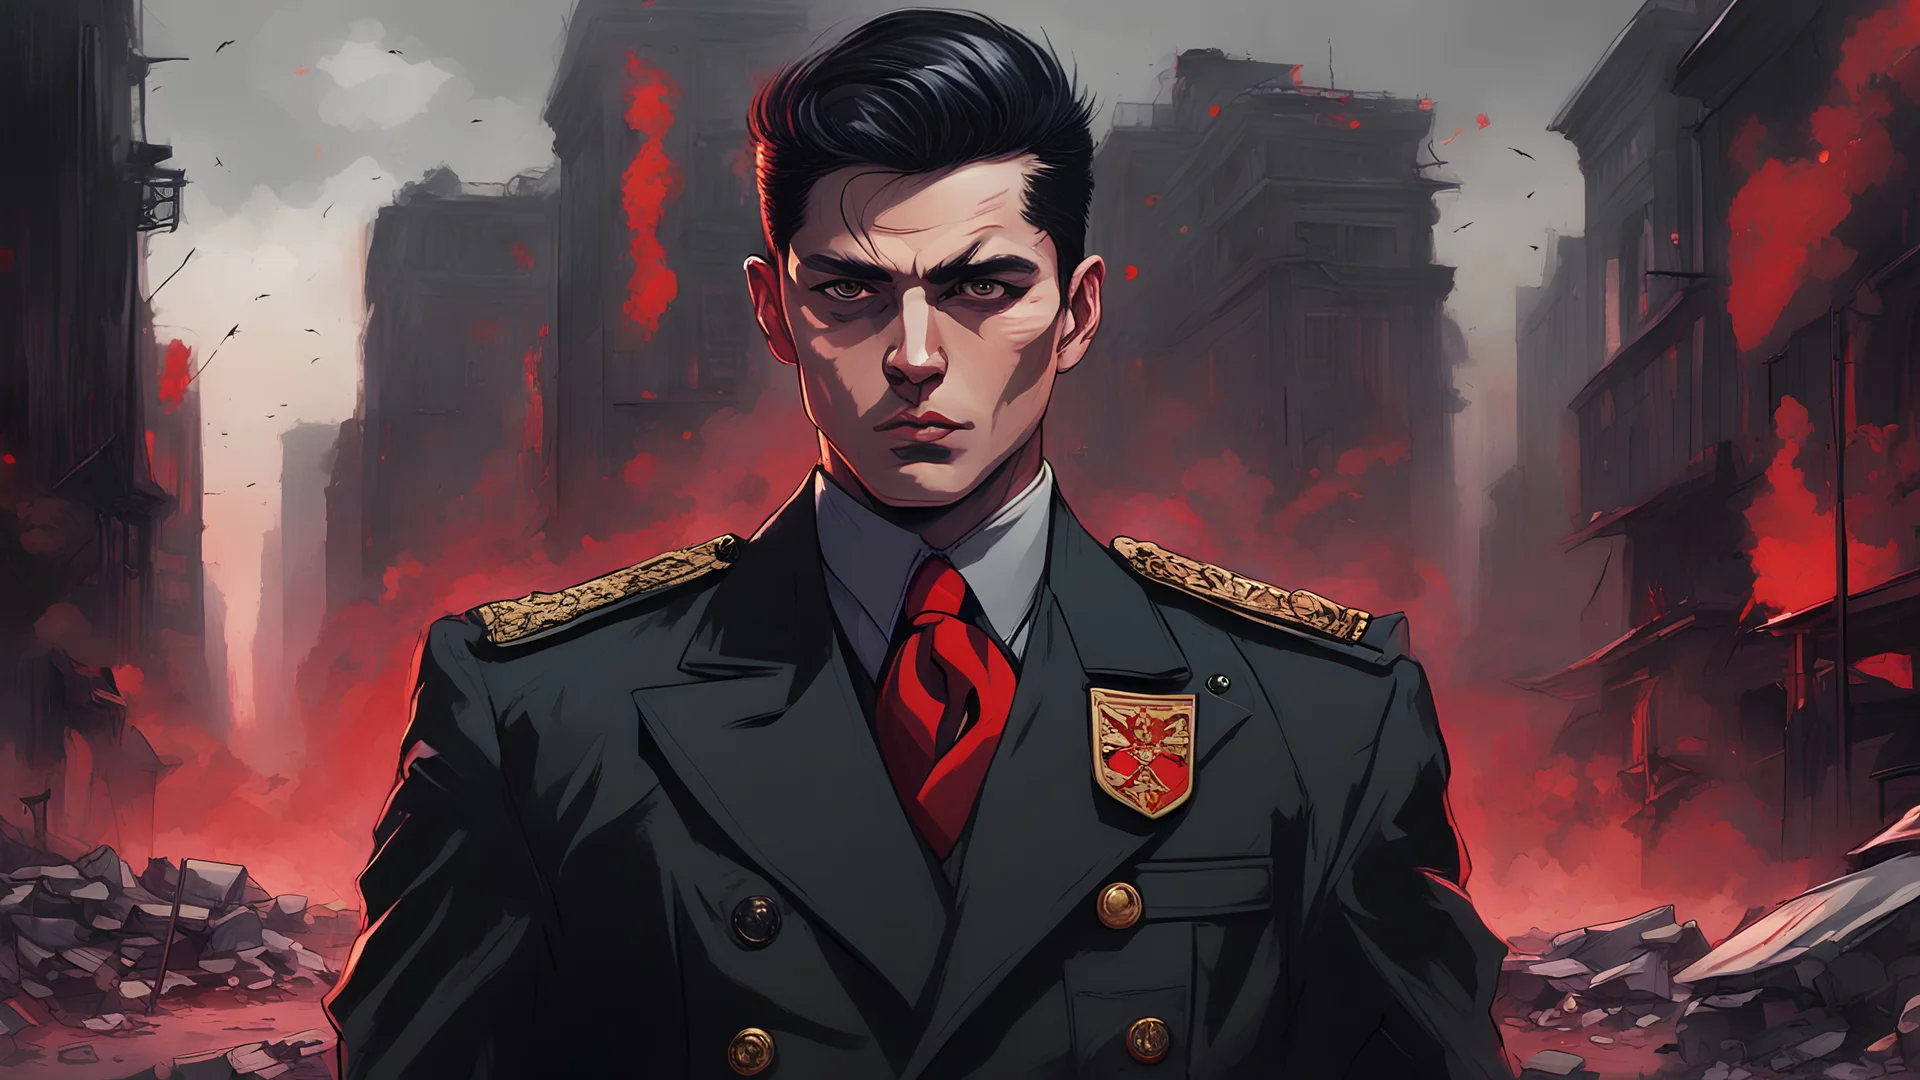 Step into the world of a young human army general, with a portrait that captures every detail of their uniform, from the perfectly pressed suit to the polished buttons. The background is a landscape of devastated city with red and black street corridorsa. But beware, for there is a demonic allure to this general, a hint of darkness lurking beneath the surface. Colors: black and red. Add scrolling binary code, hinting at the technological advancements of the military. Add robots.